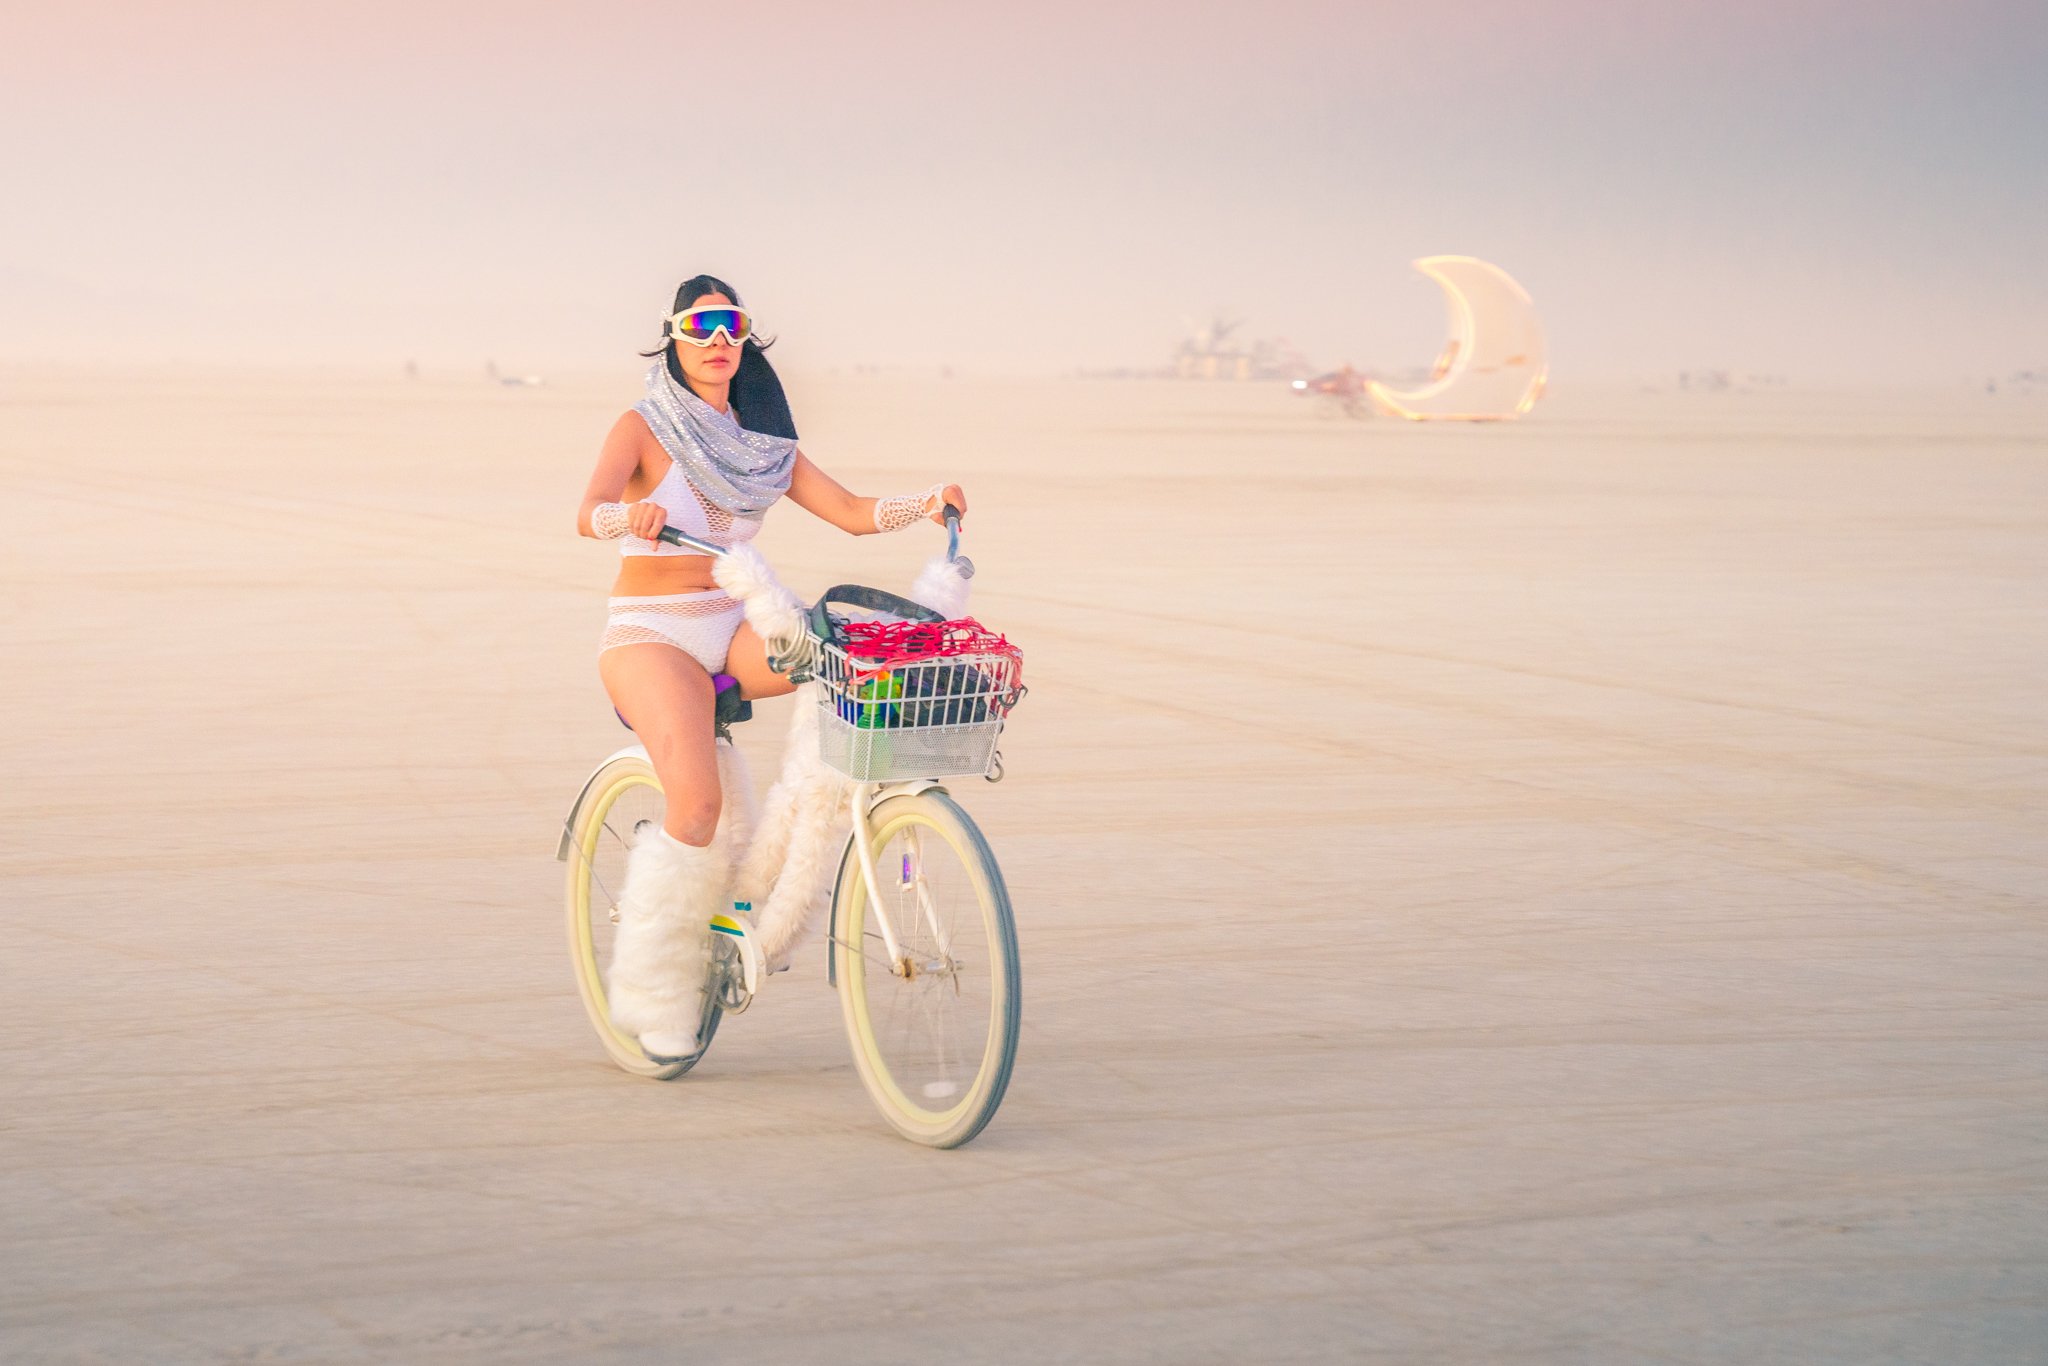 Burning Man 2022 - Slicing through the dust with purpose